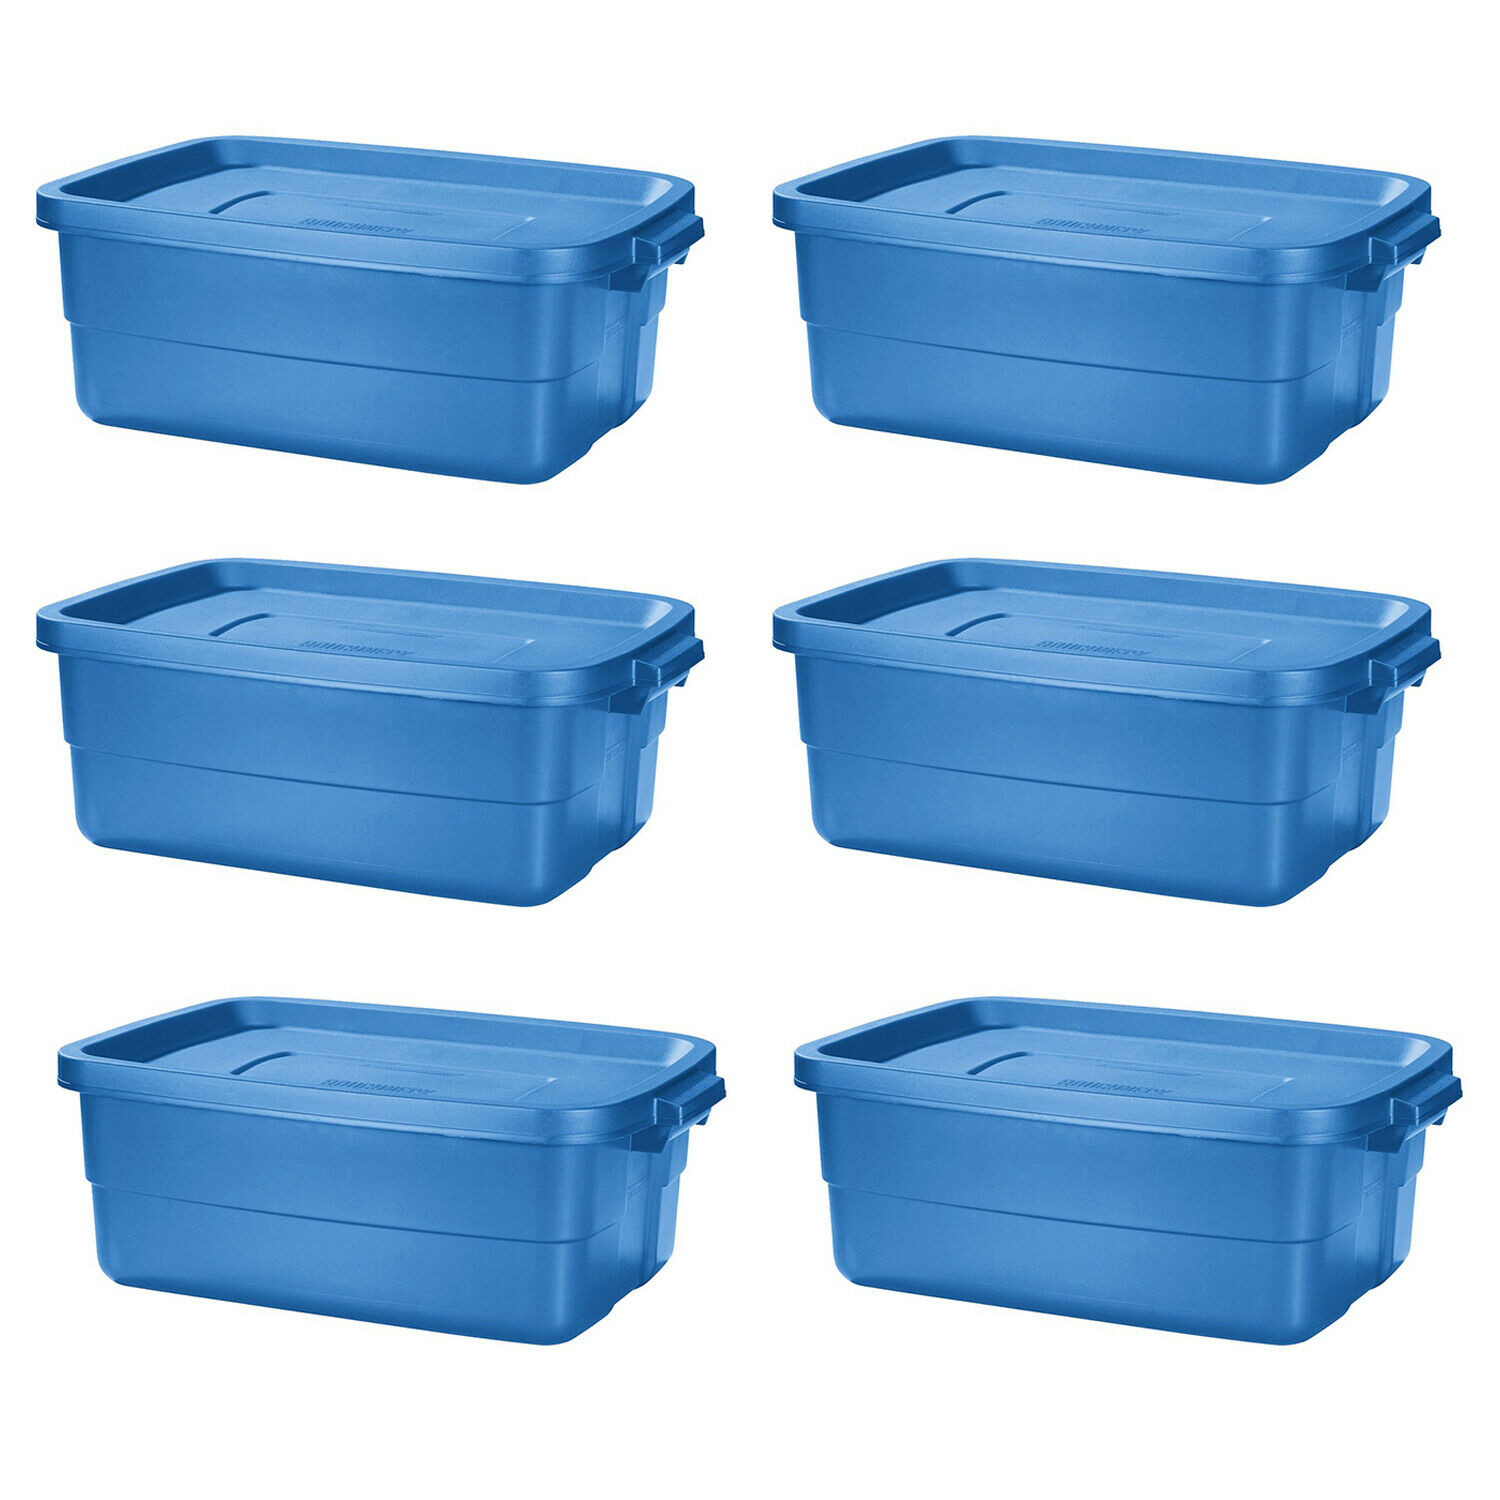 Rubbermaid Roughneck Tote 10 Gallon Container, Heritage Blue (6 Pack) (Open Box)